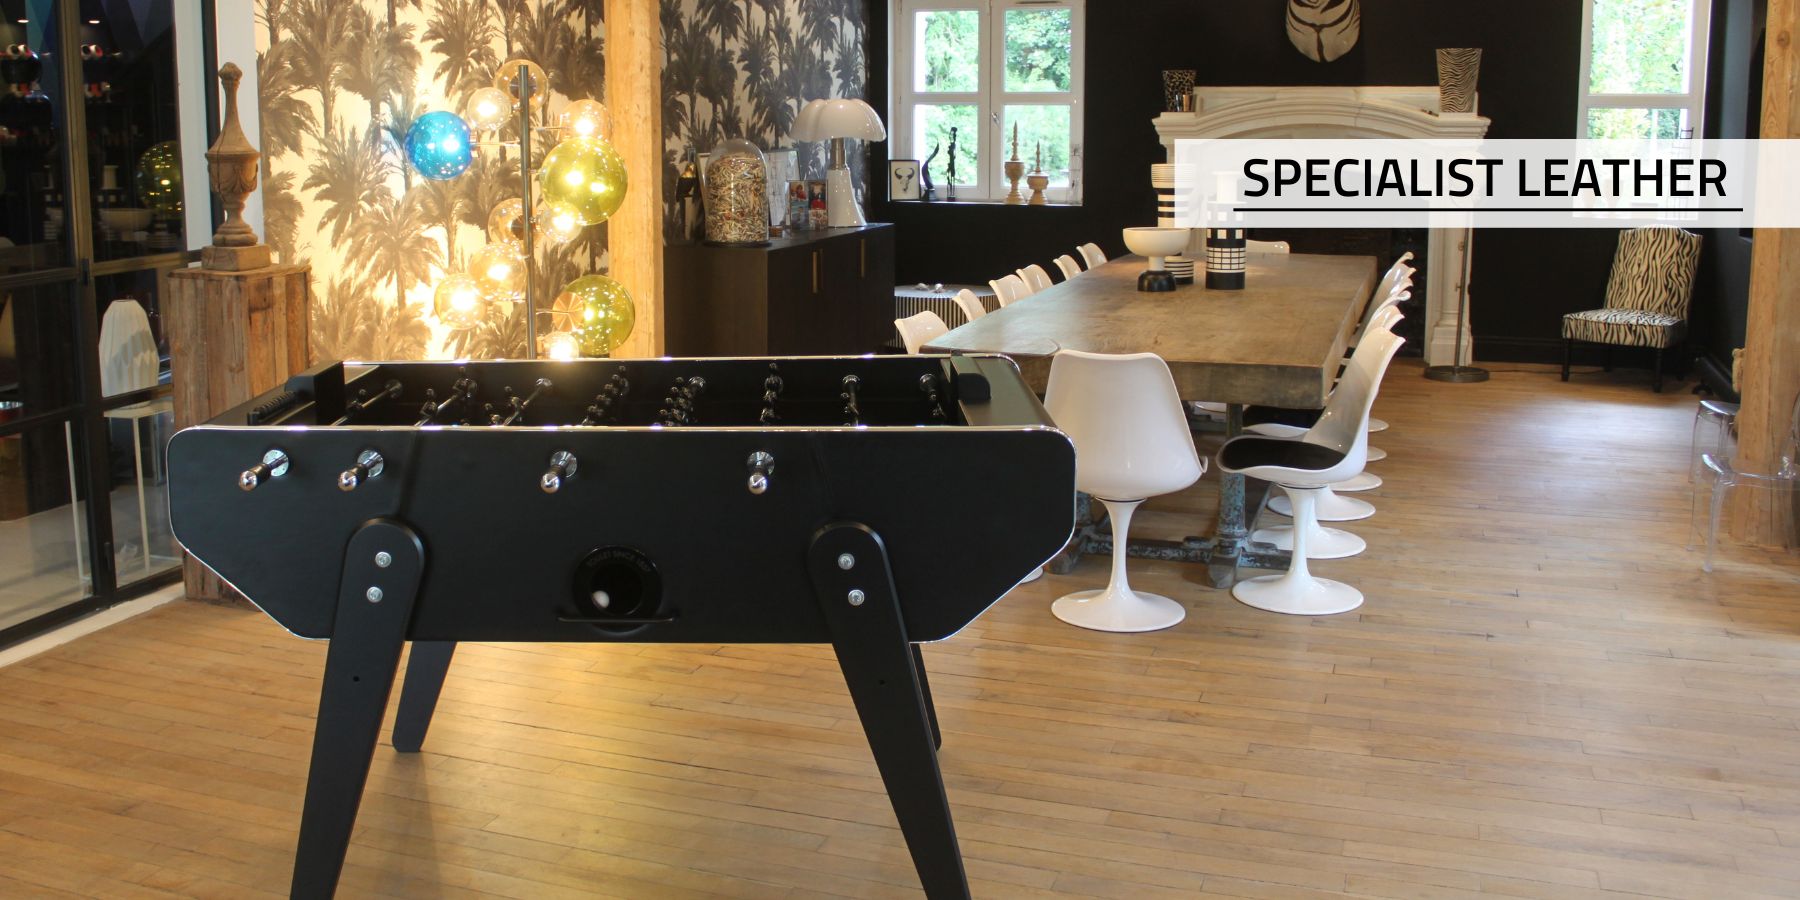 Buy leather foosball table black custom made in france high end - Specialist Leather - Babyfoot By Toulet